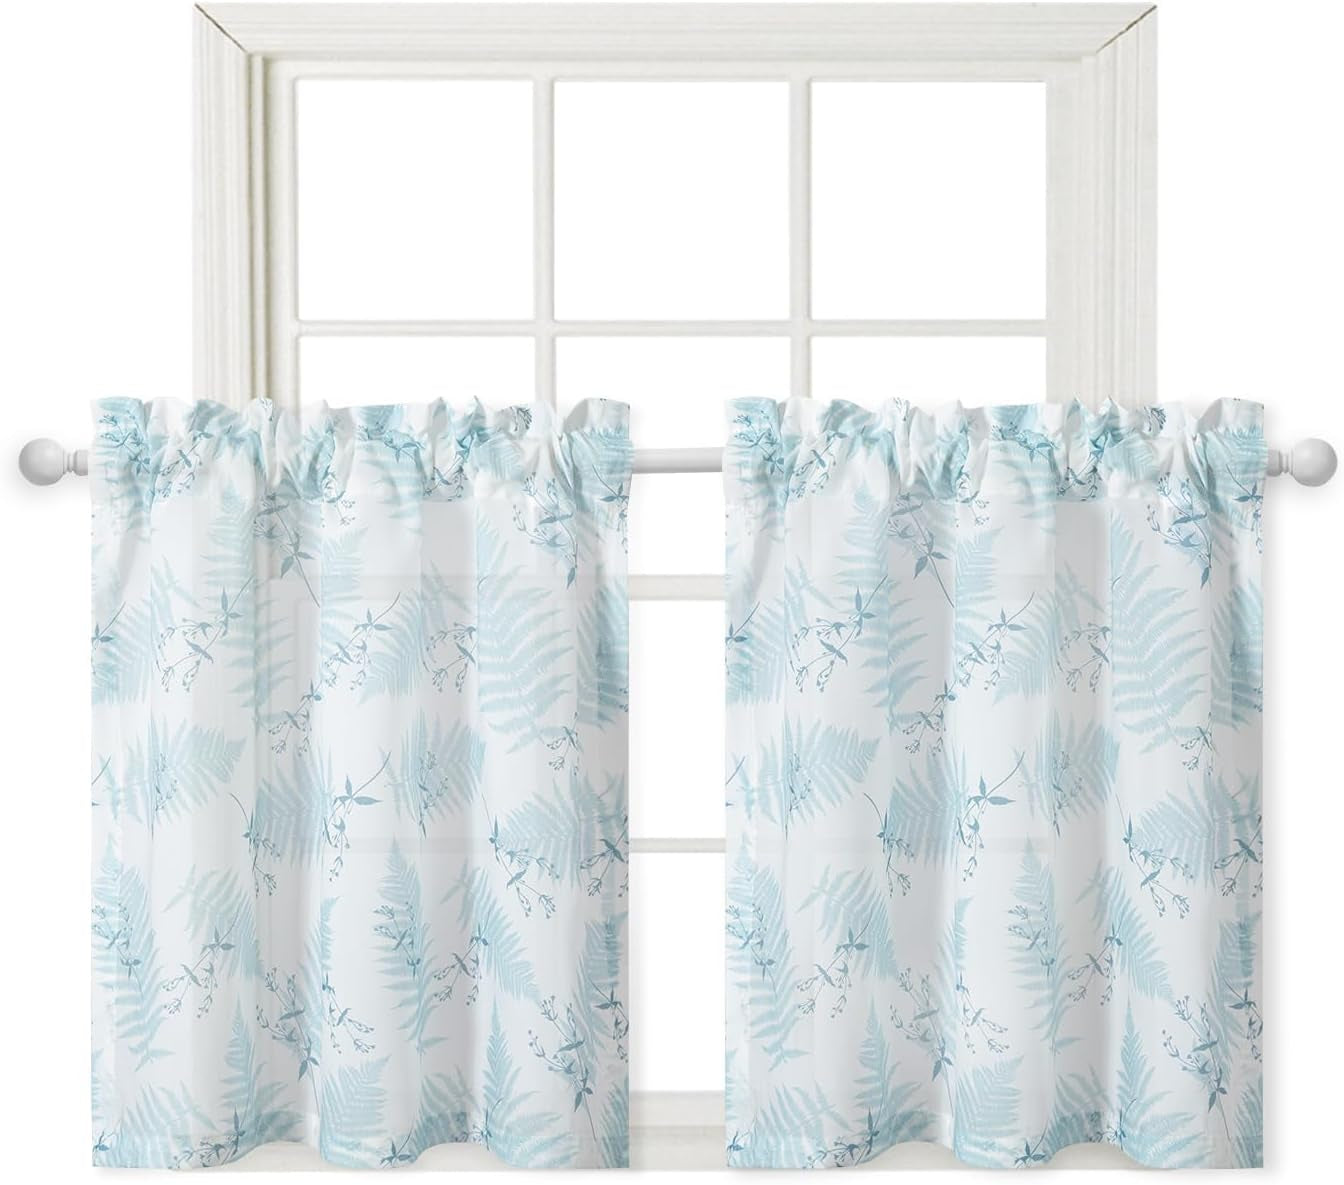 VOGOL Colorful Floral Print Tier Curtains, 2 Panels Smooth Textured Decorative Cafe Curtain, Rod Pocket Sheer Drapery for Farmhouse, W 30 X L 24  VOGOL Mn014 W30 X L24 